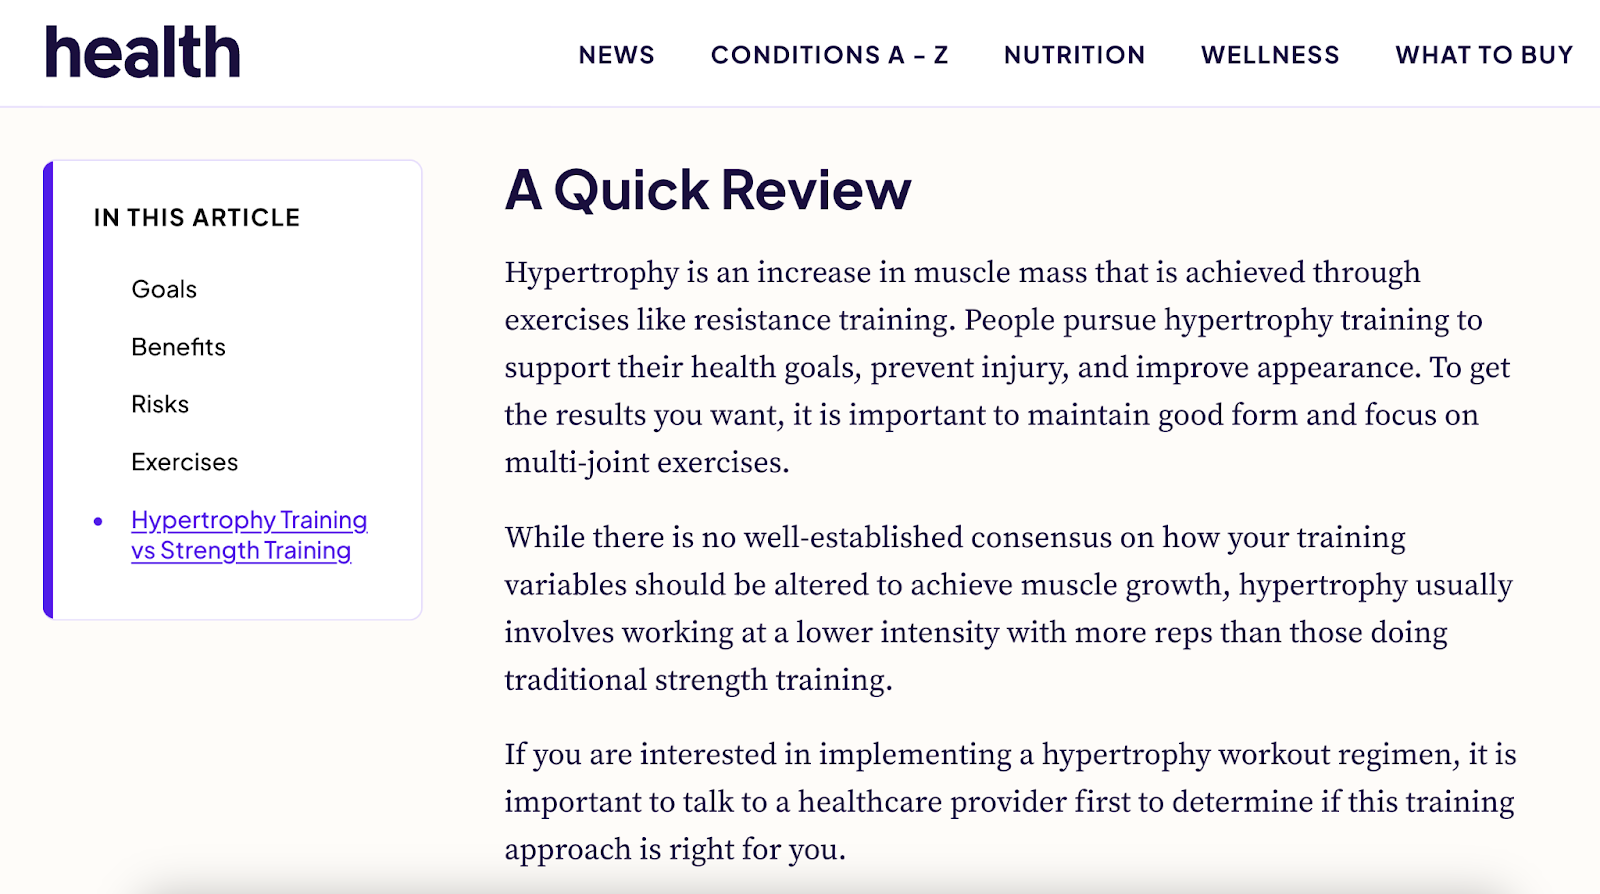 "A Quick Review" section of guide to hypertrophy from Health.com